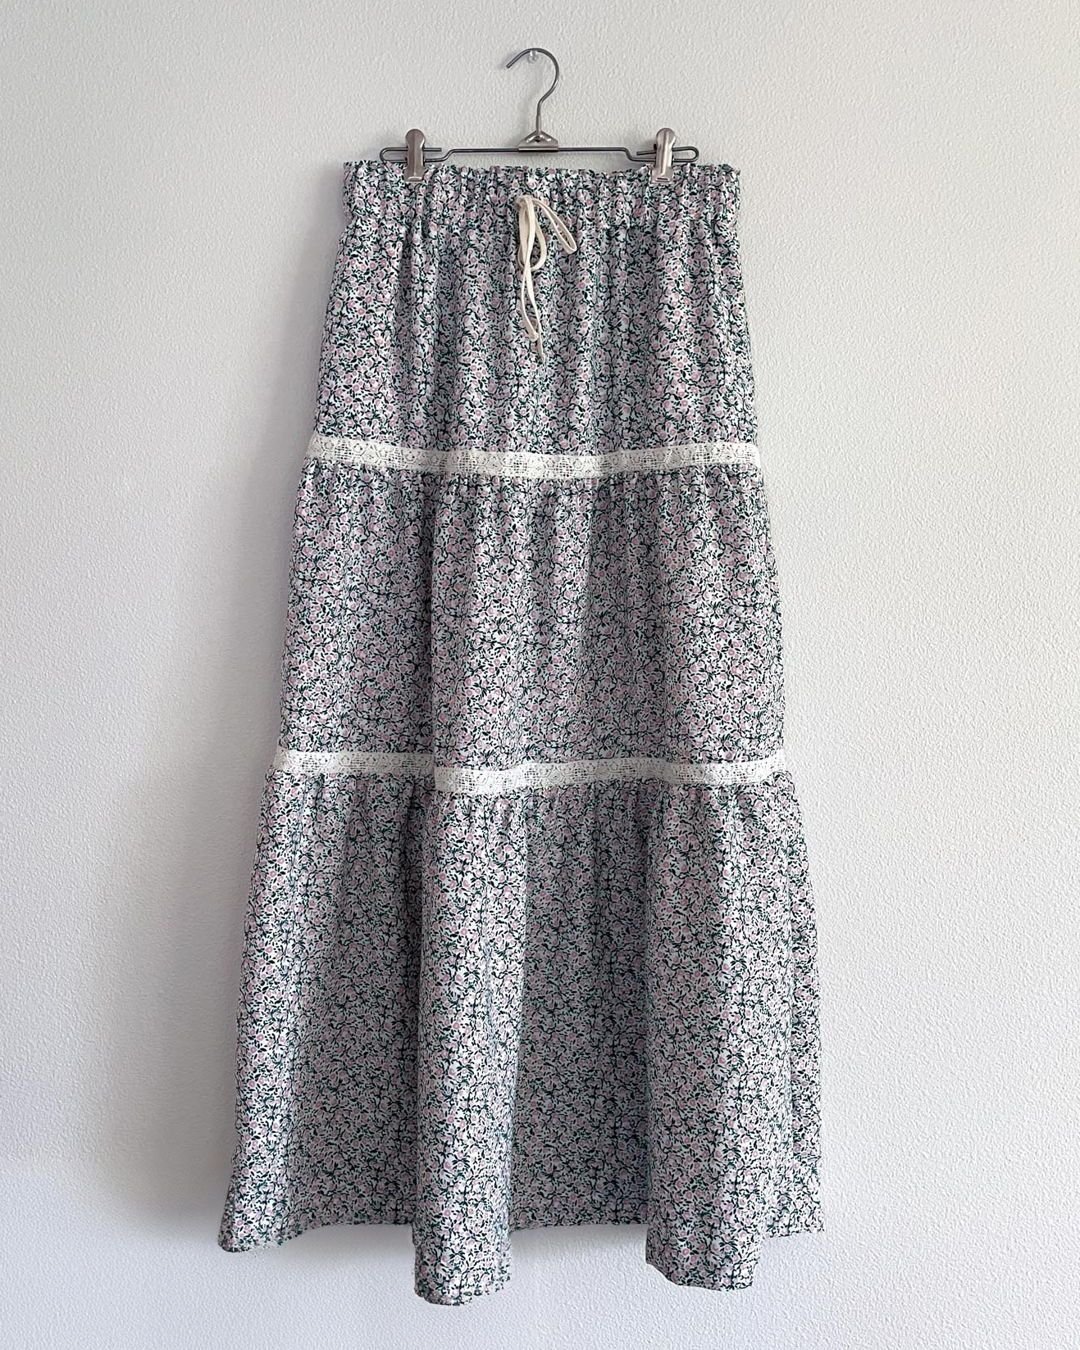 I have been loving this new me-made skirt so much! 🌸 The floral print, lace trim and maxi length are perfection. 😍 

I self-drafted this skirt and shared all the details, including the formulas to draft an identical one to your own proportions, in 